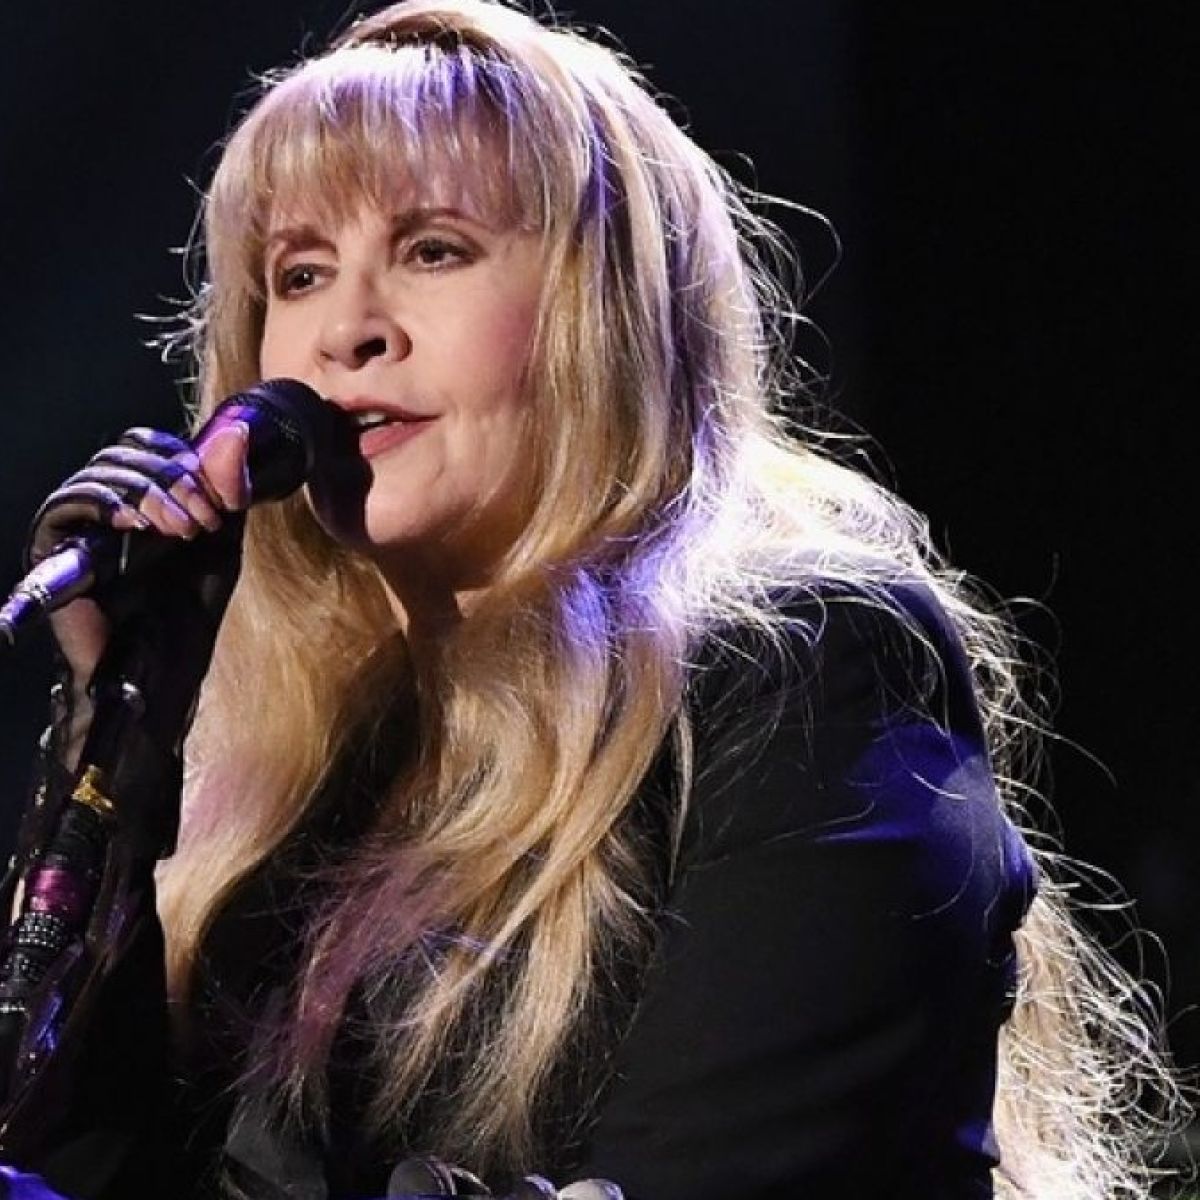 Stevie Nicks If I Had Not Had That Abortion There Would Have Been No Fleetwood Mac